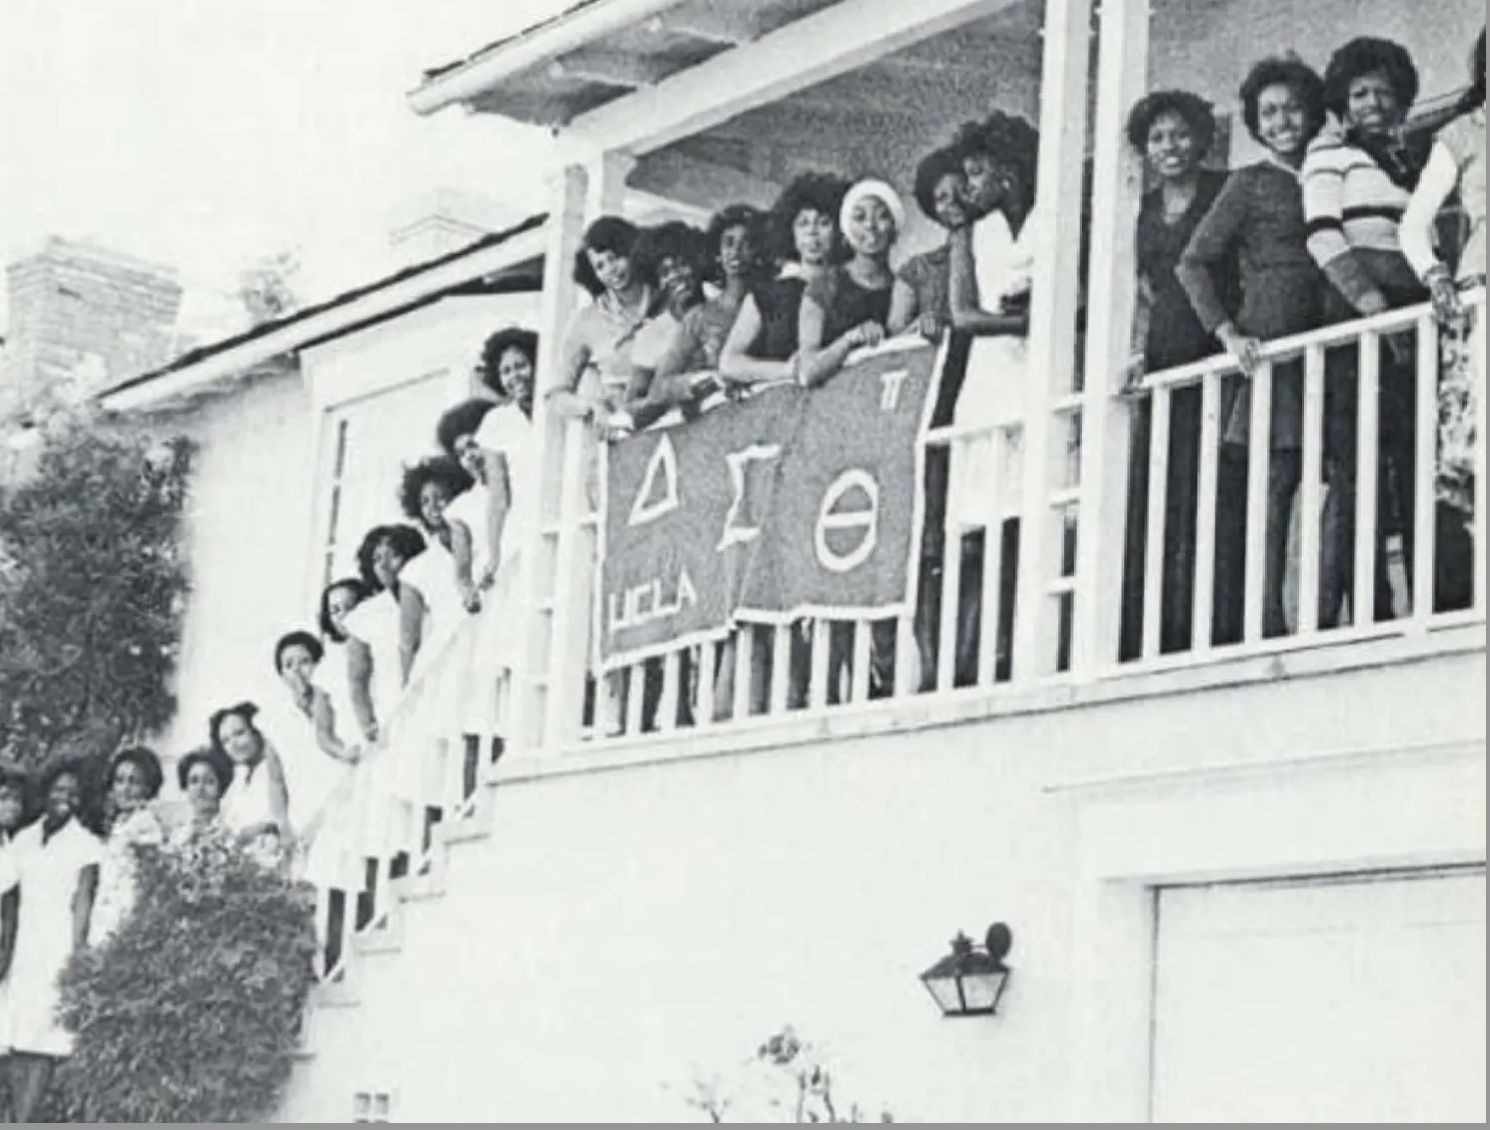 Members of the Pi chapter of Delta Sigma Theta standing on outdoor stairs and balcony the 1960s